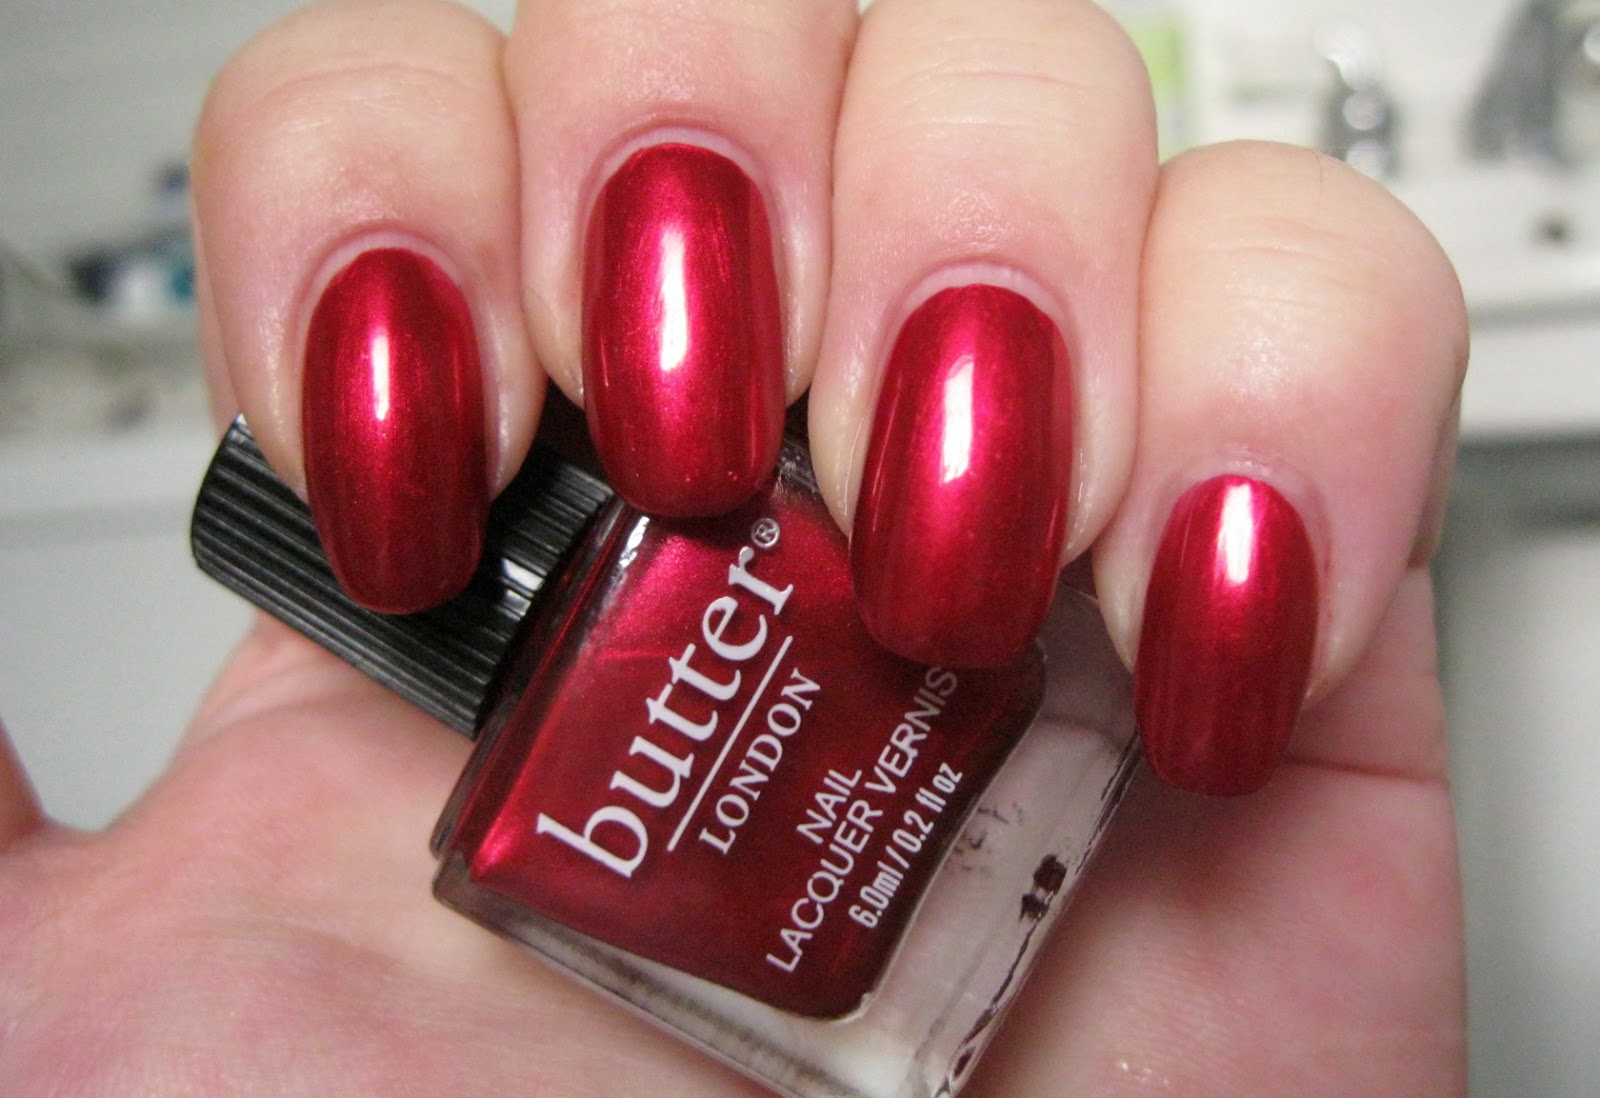 7. Butter London Nail Lacquer in "Knees Up" - wide 9